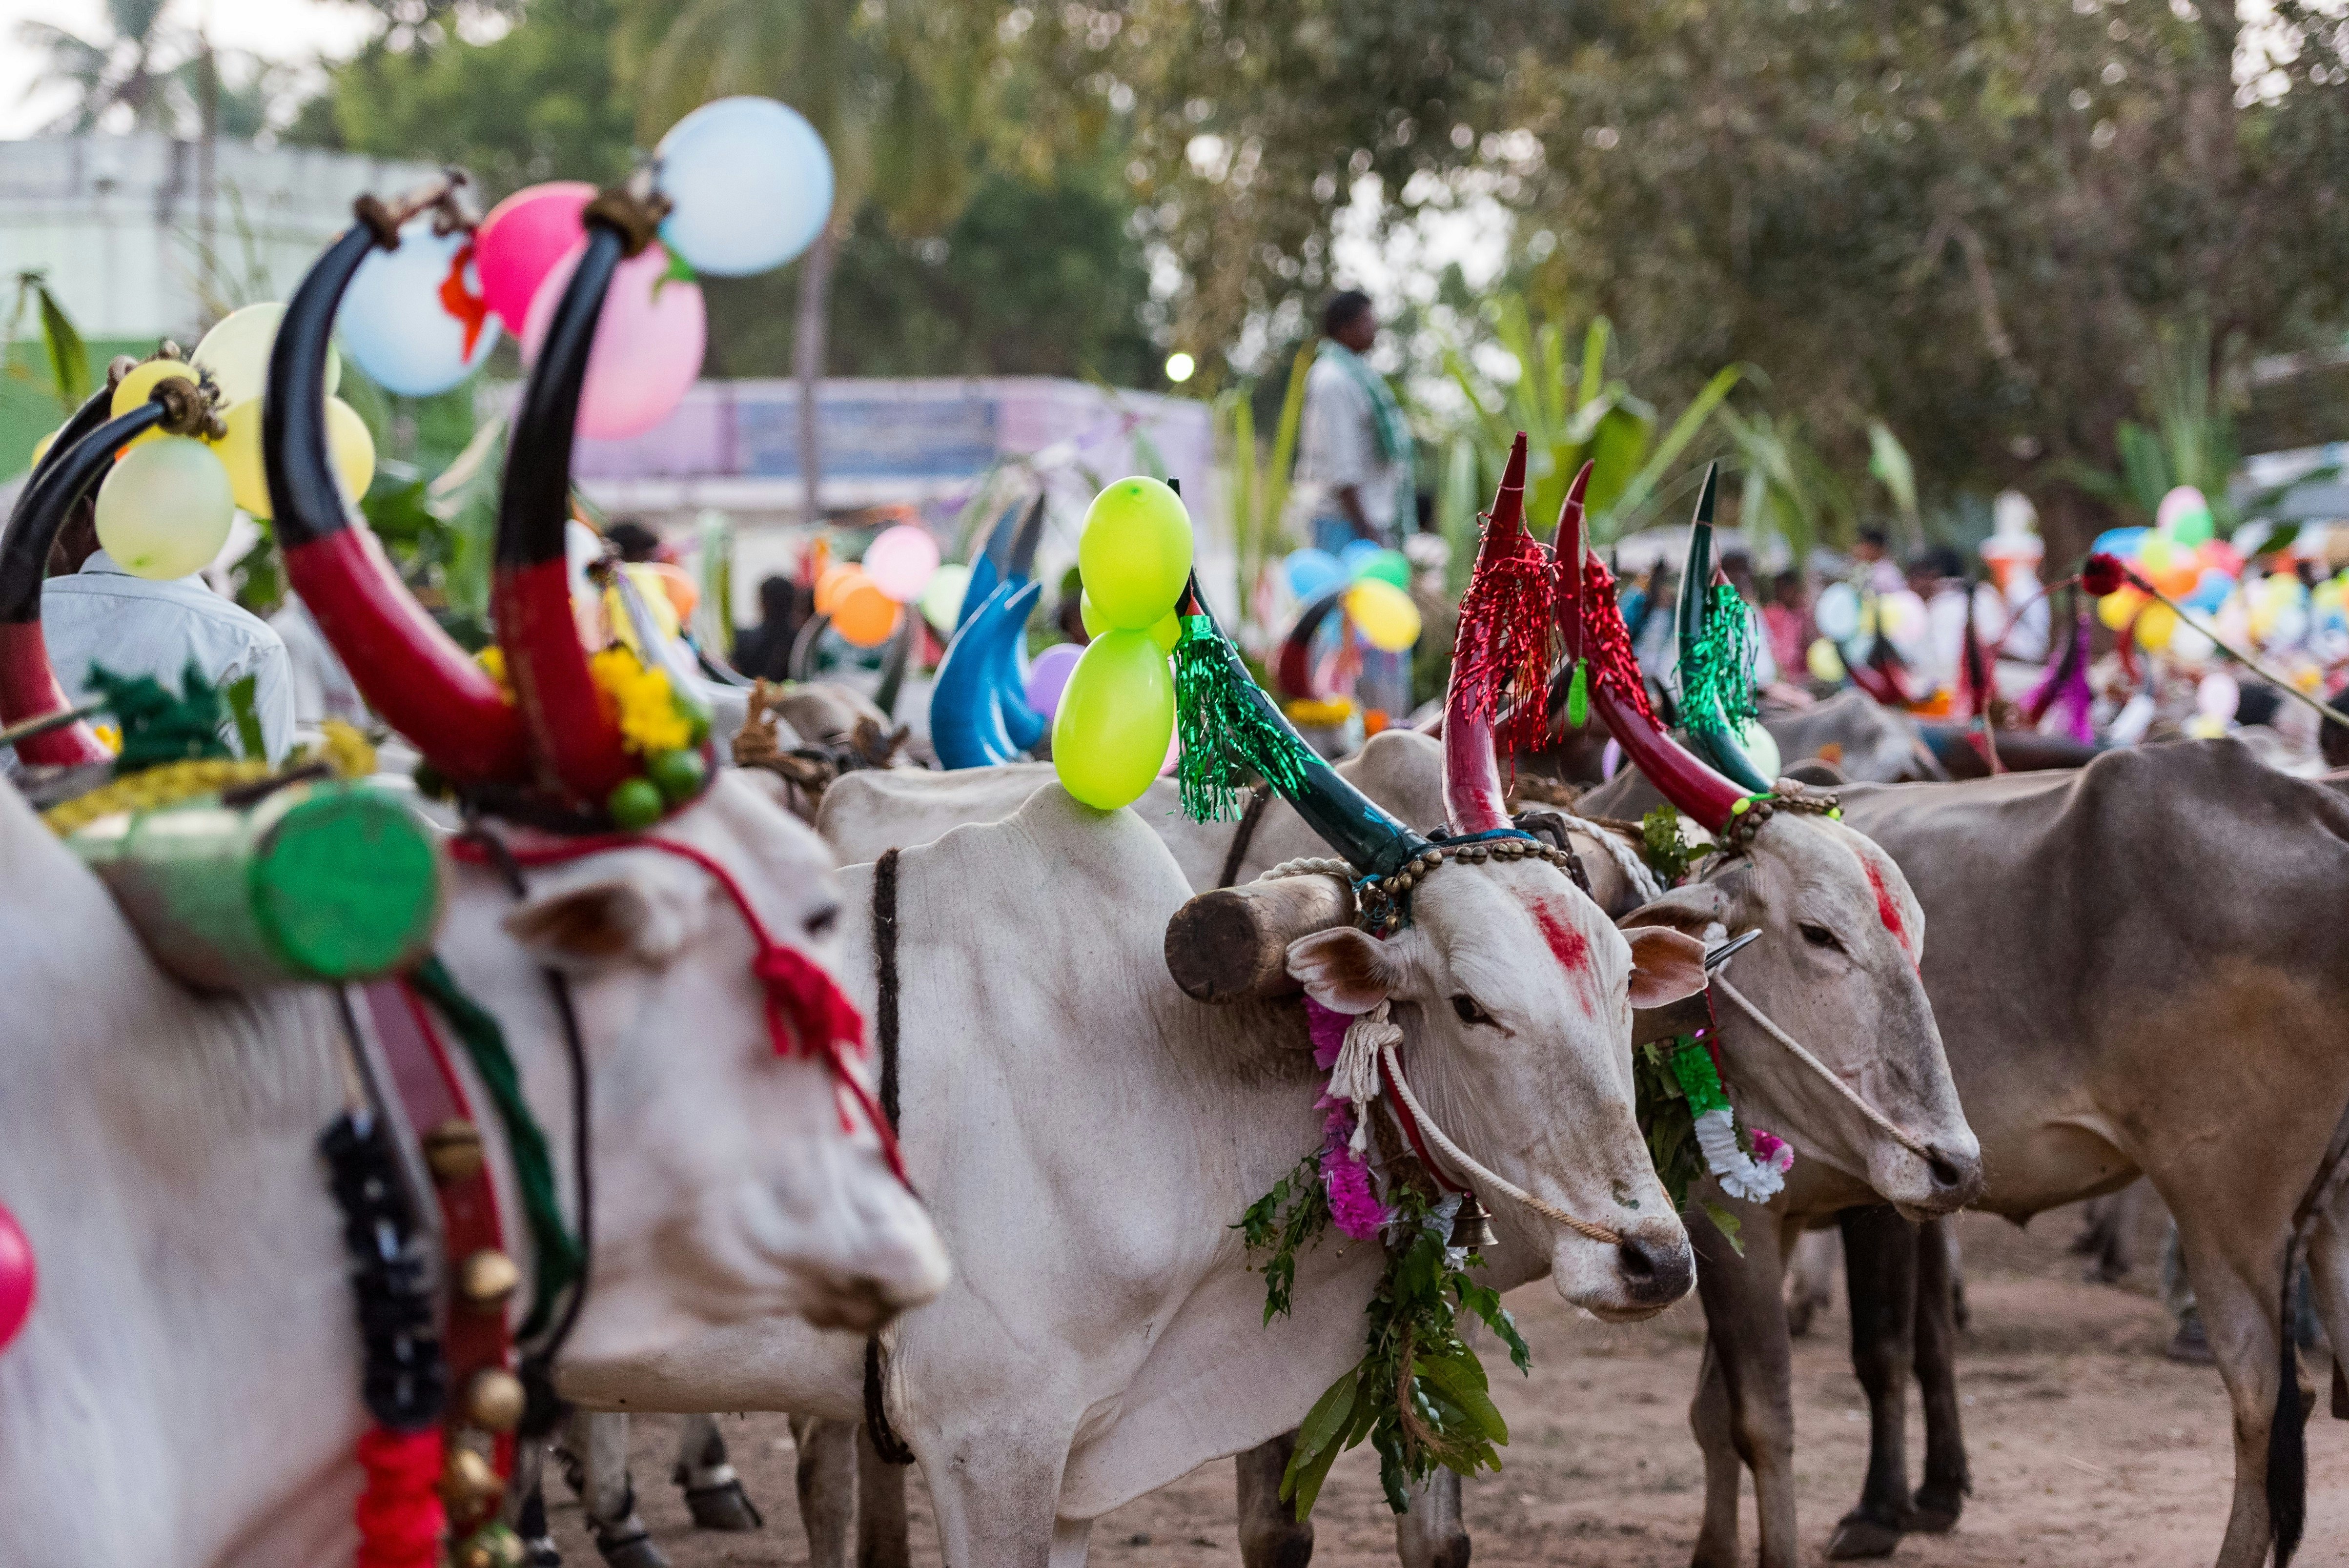 A group of white cows stand in a field, their horns have been painted and colourful ribbons are tied around their necks as part of the Pongal celebrations. 